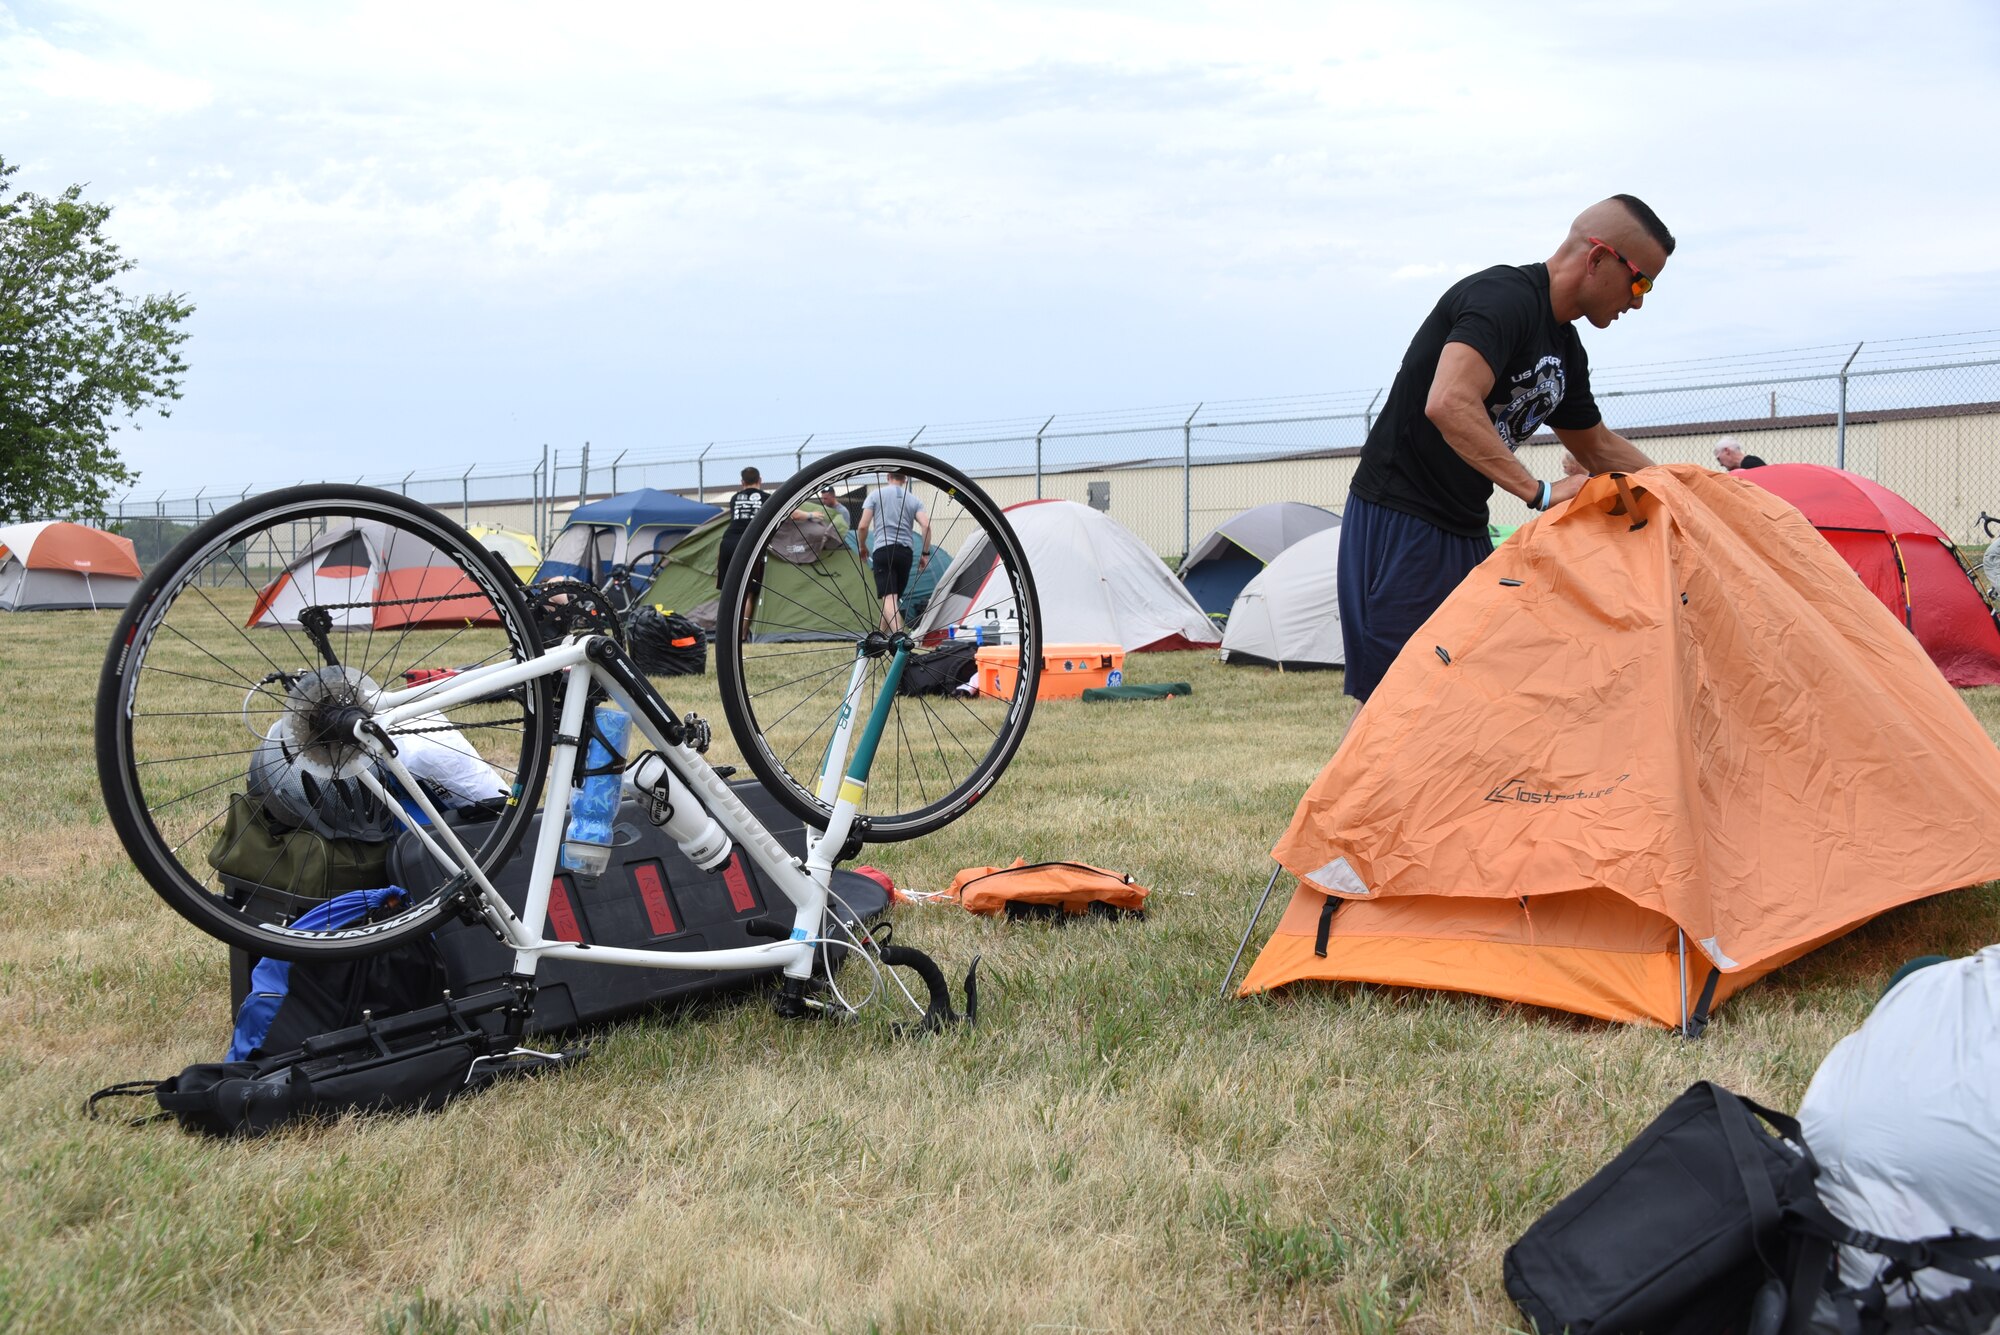 An AFCT member attaches a rain cover to a tent